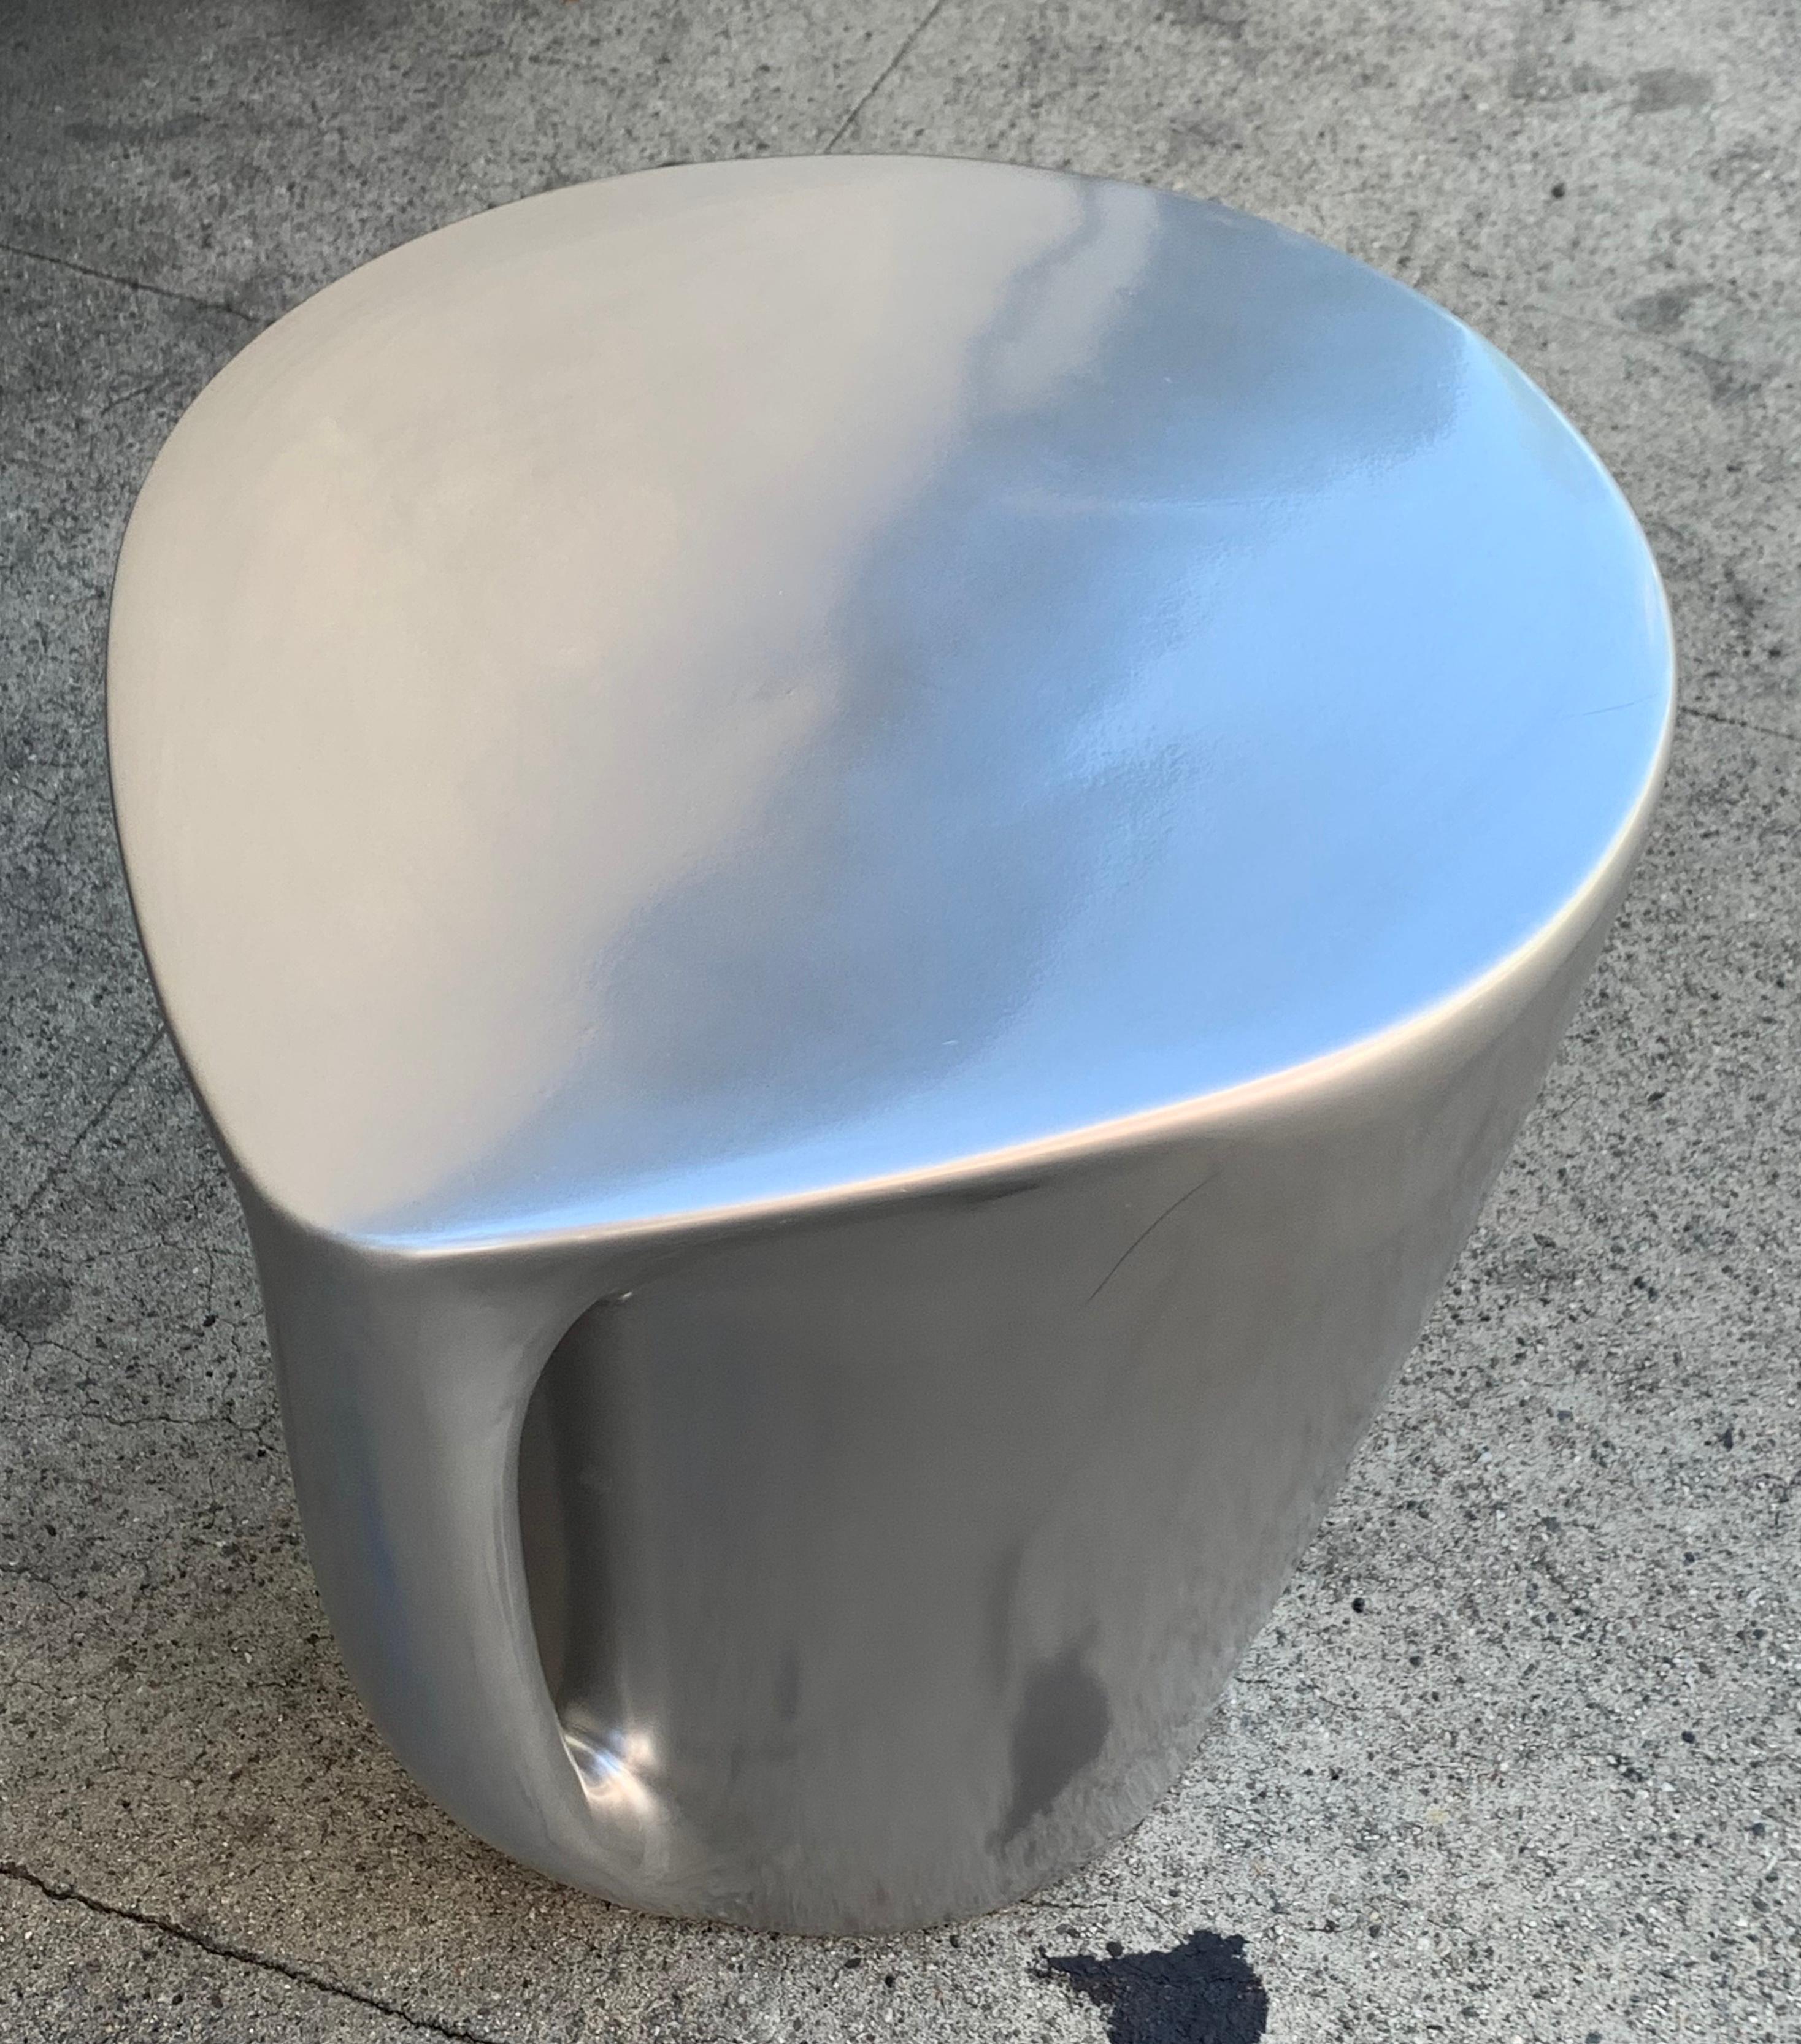 Philippe Starck 2008 miss T XO icon porcelain seat or object d’art, made in France and also available in silver and black, we have a total of 1 in gold, 2 in black and 2 in silver.
Measures: 17” high x 15” wide x 17” deep.